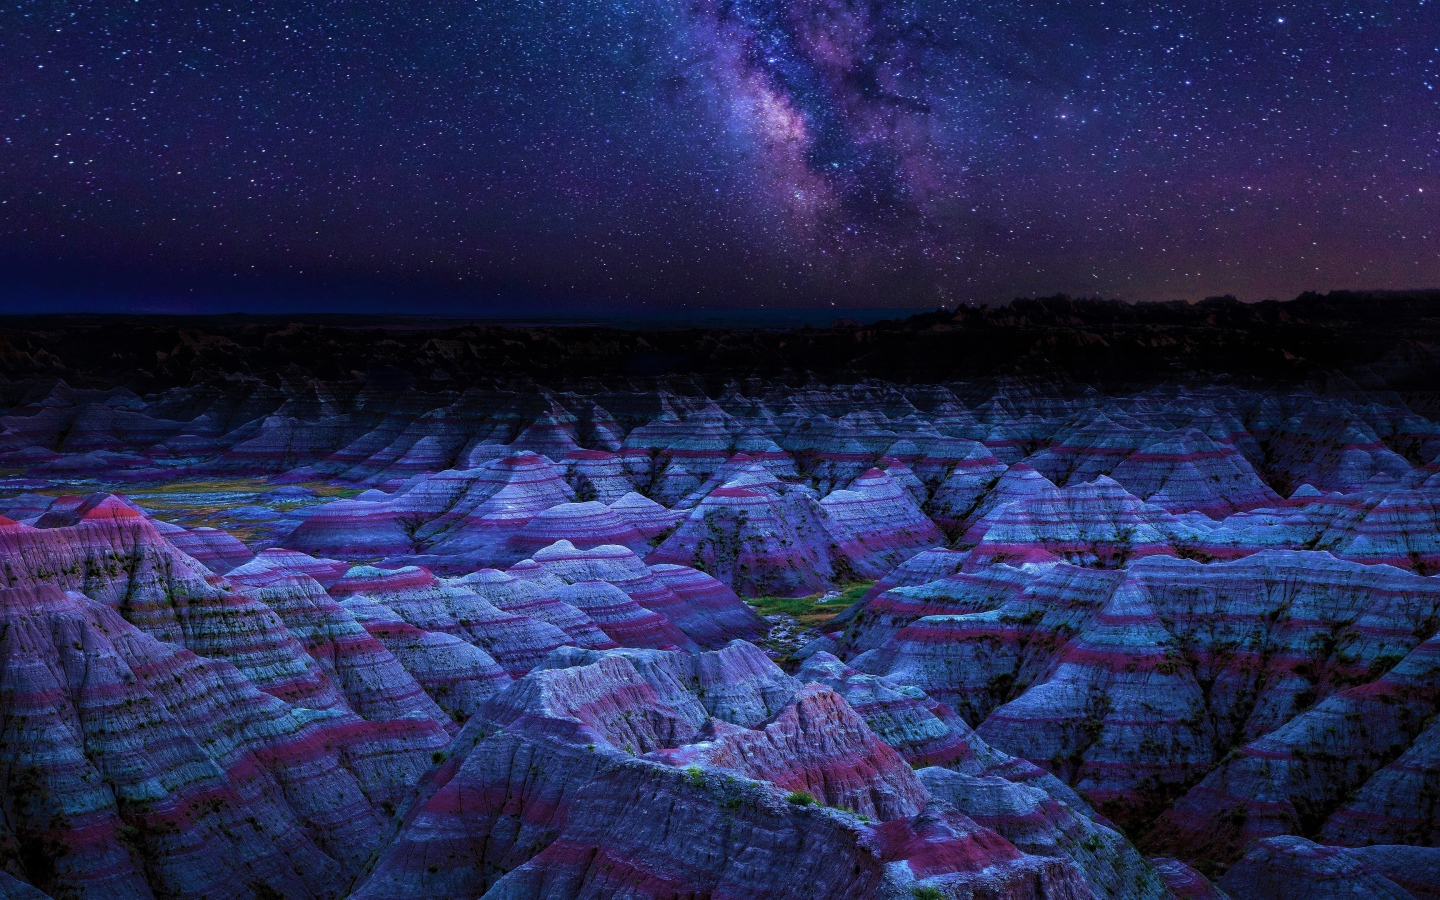 Milky Way over the rocks in the National Park of the Blacklands, USA